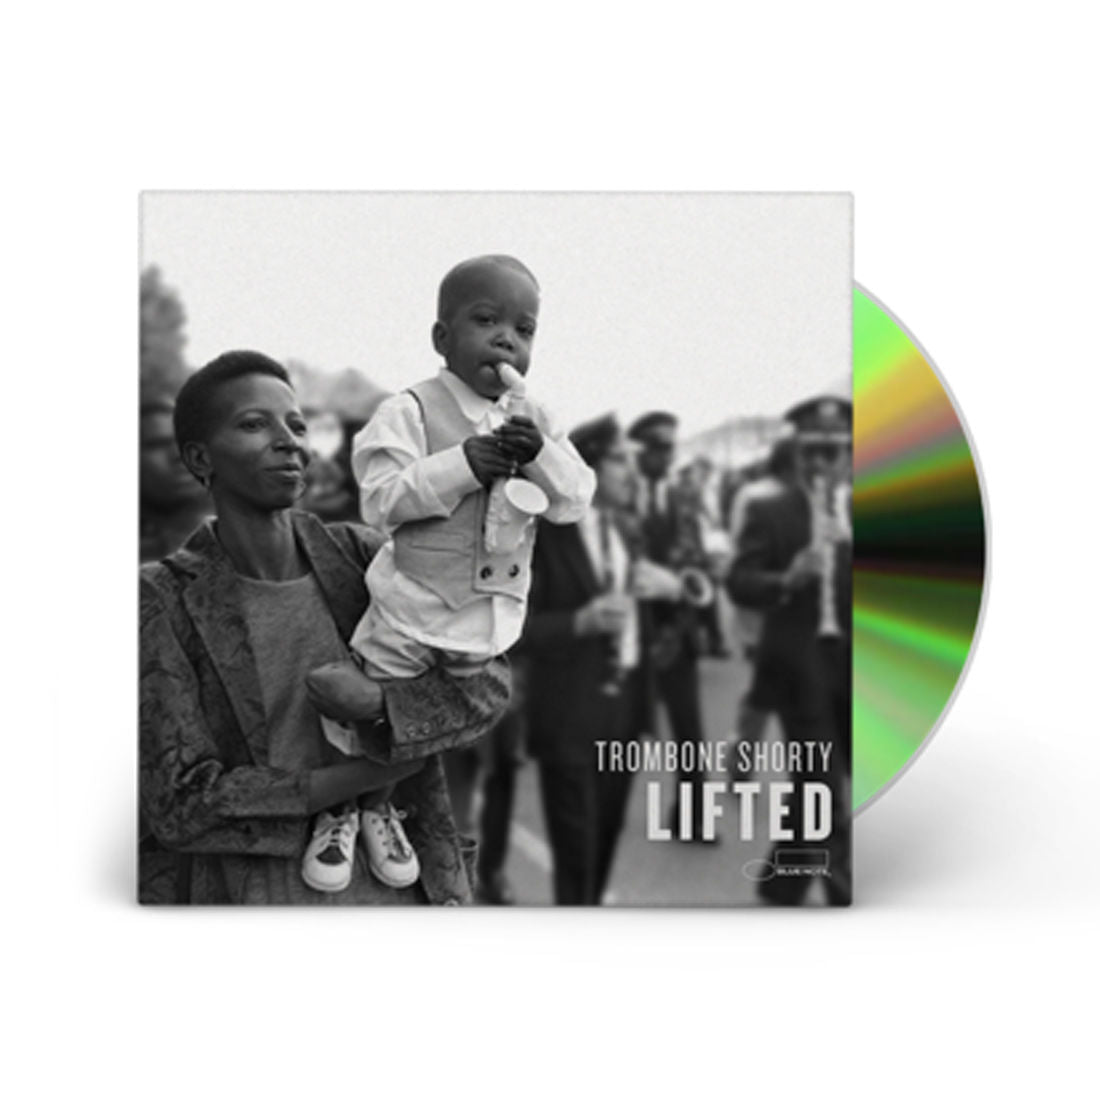 Lifted CD